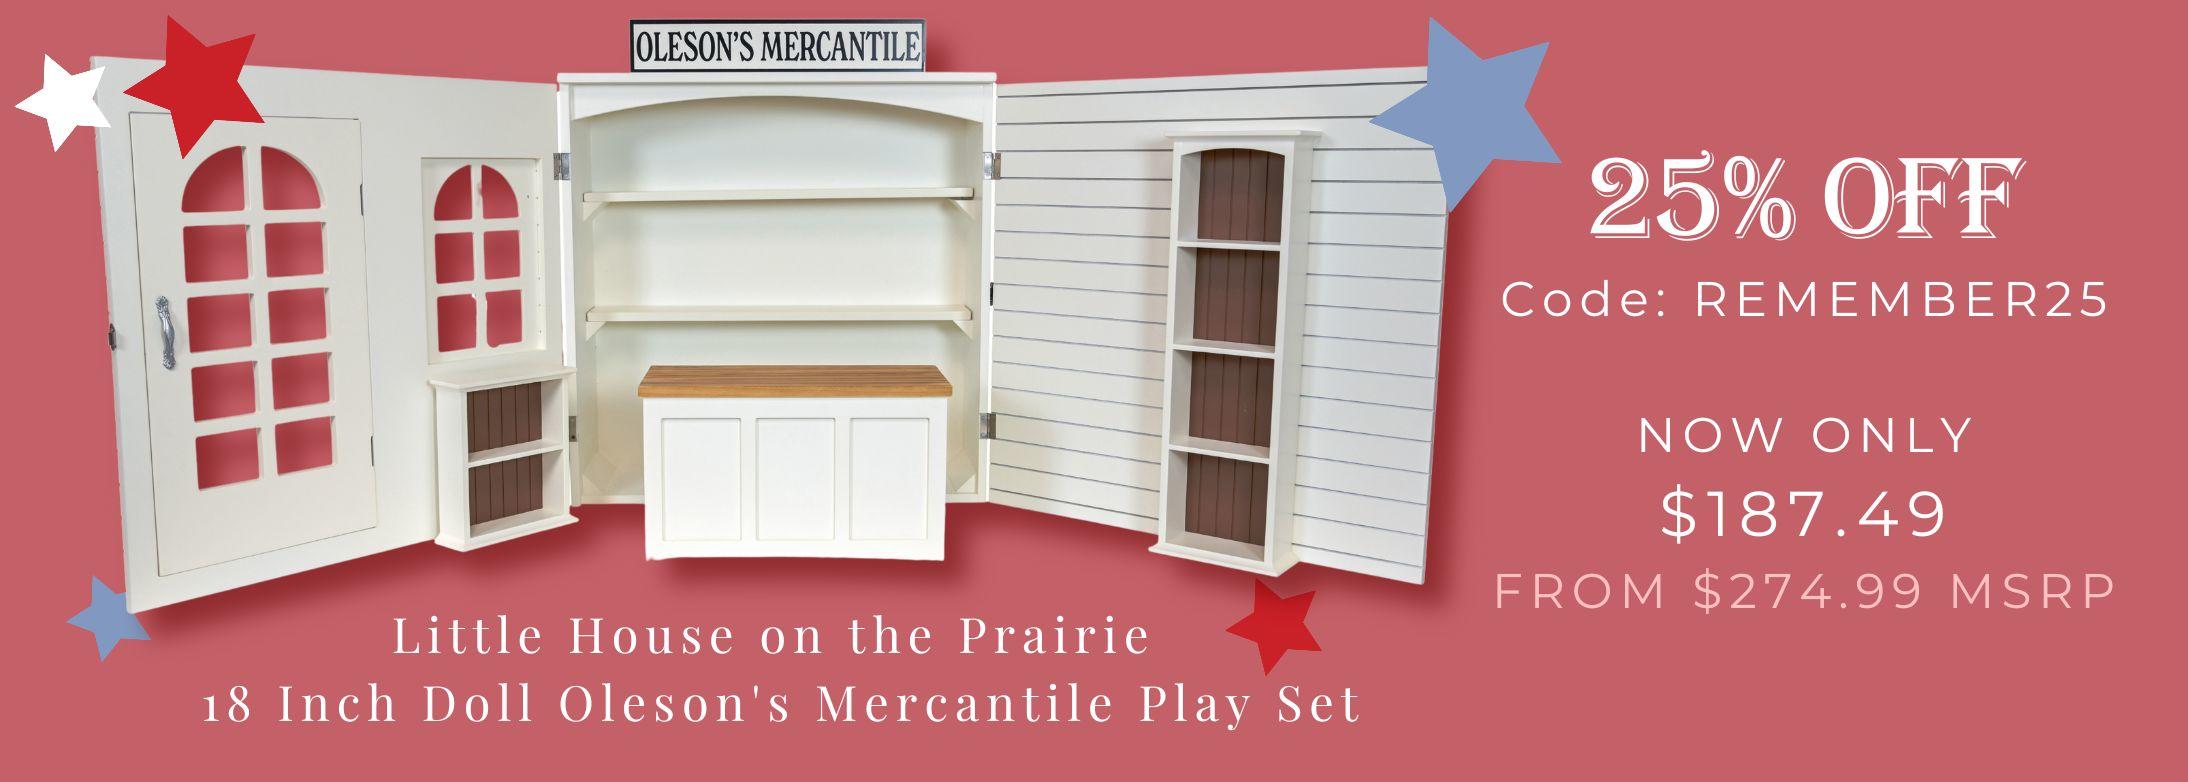 Little House on the Prairie 18 inch doll Oleson&#039;s Mercantile Play Set25% OFF Code: REMEMBER25 now only $187349 from $274.99 MSRP